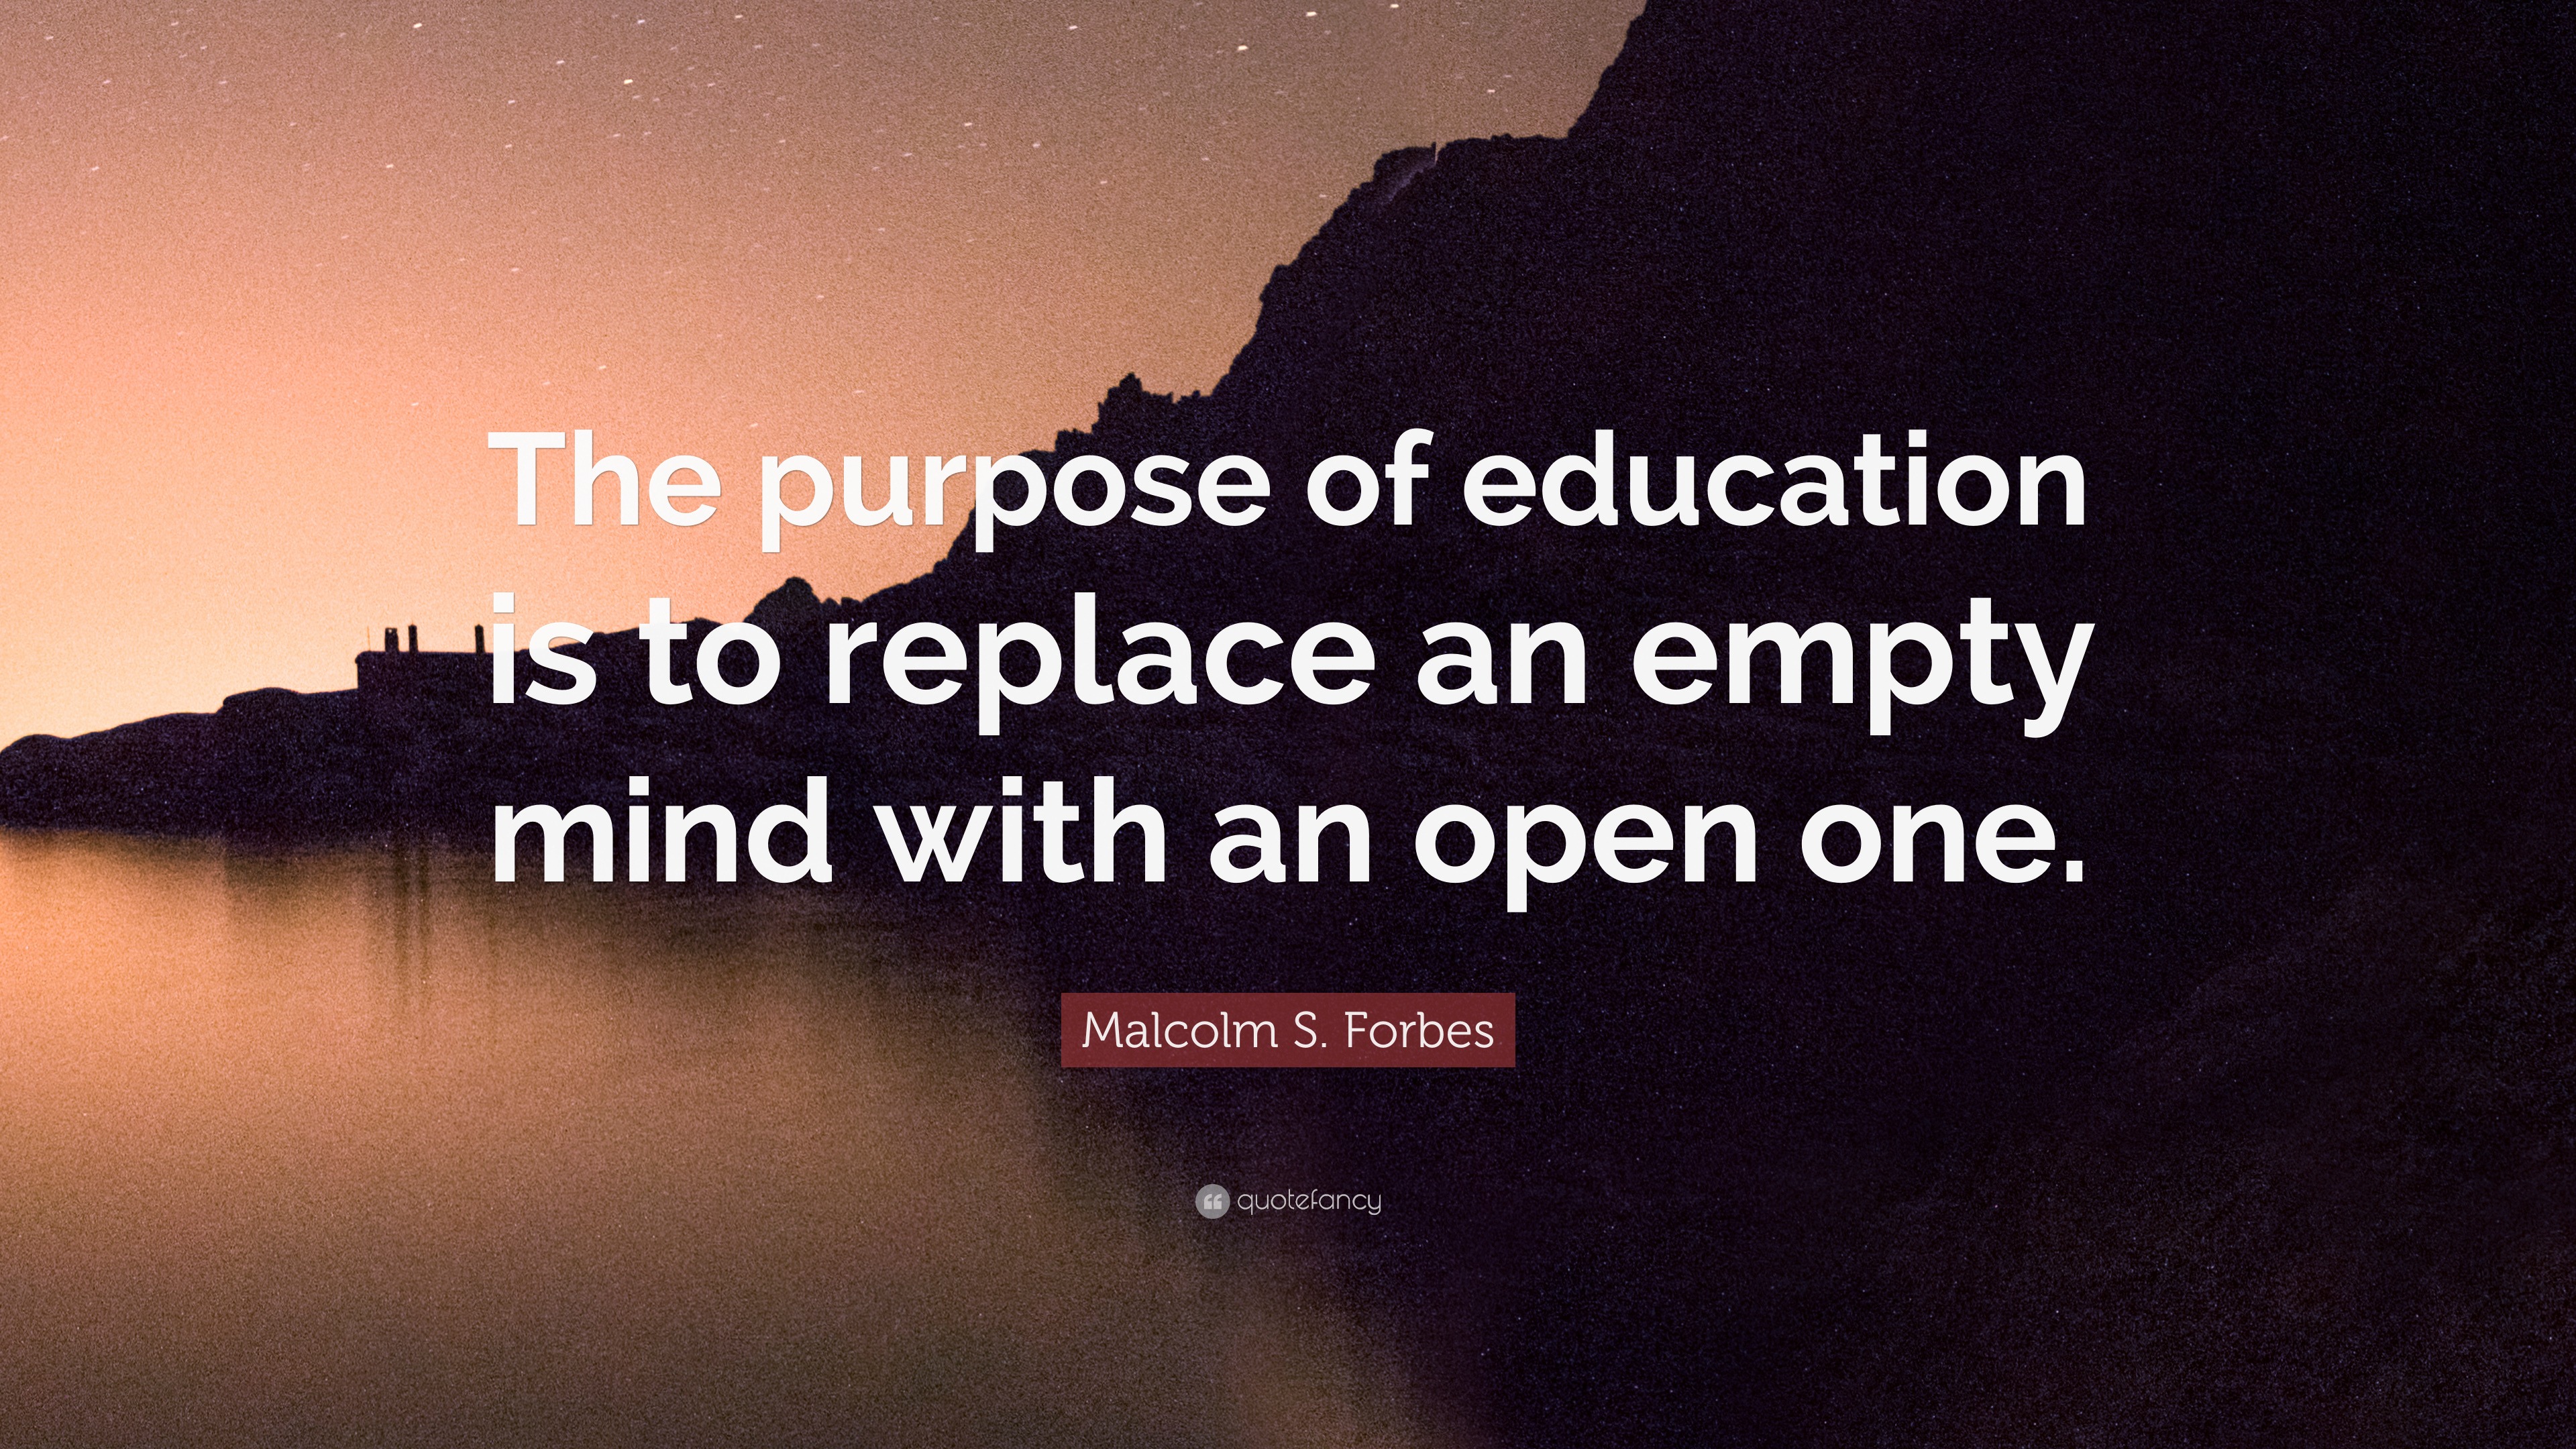 Malcolm S. Forbes Quote: “The purpose of education is to replace an